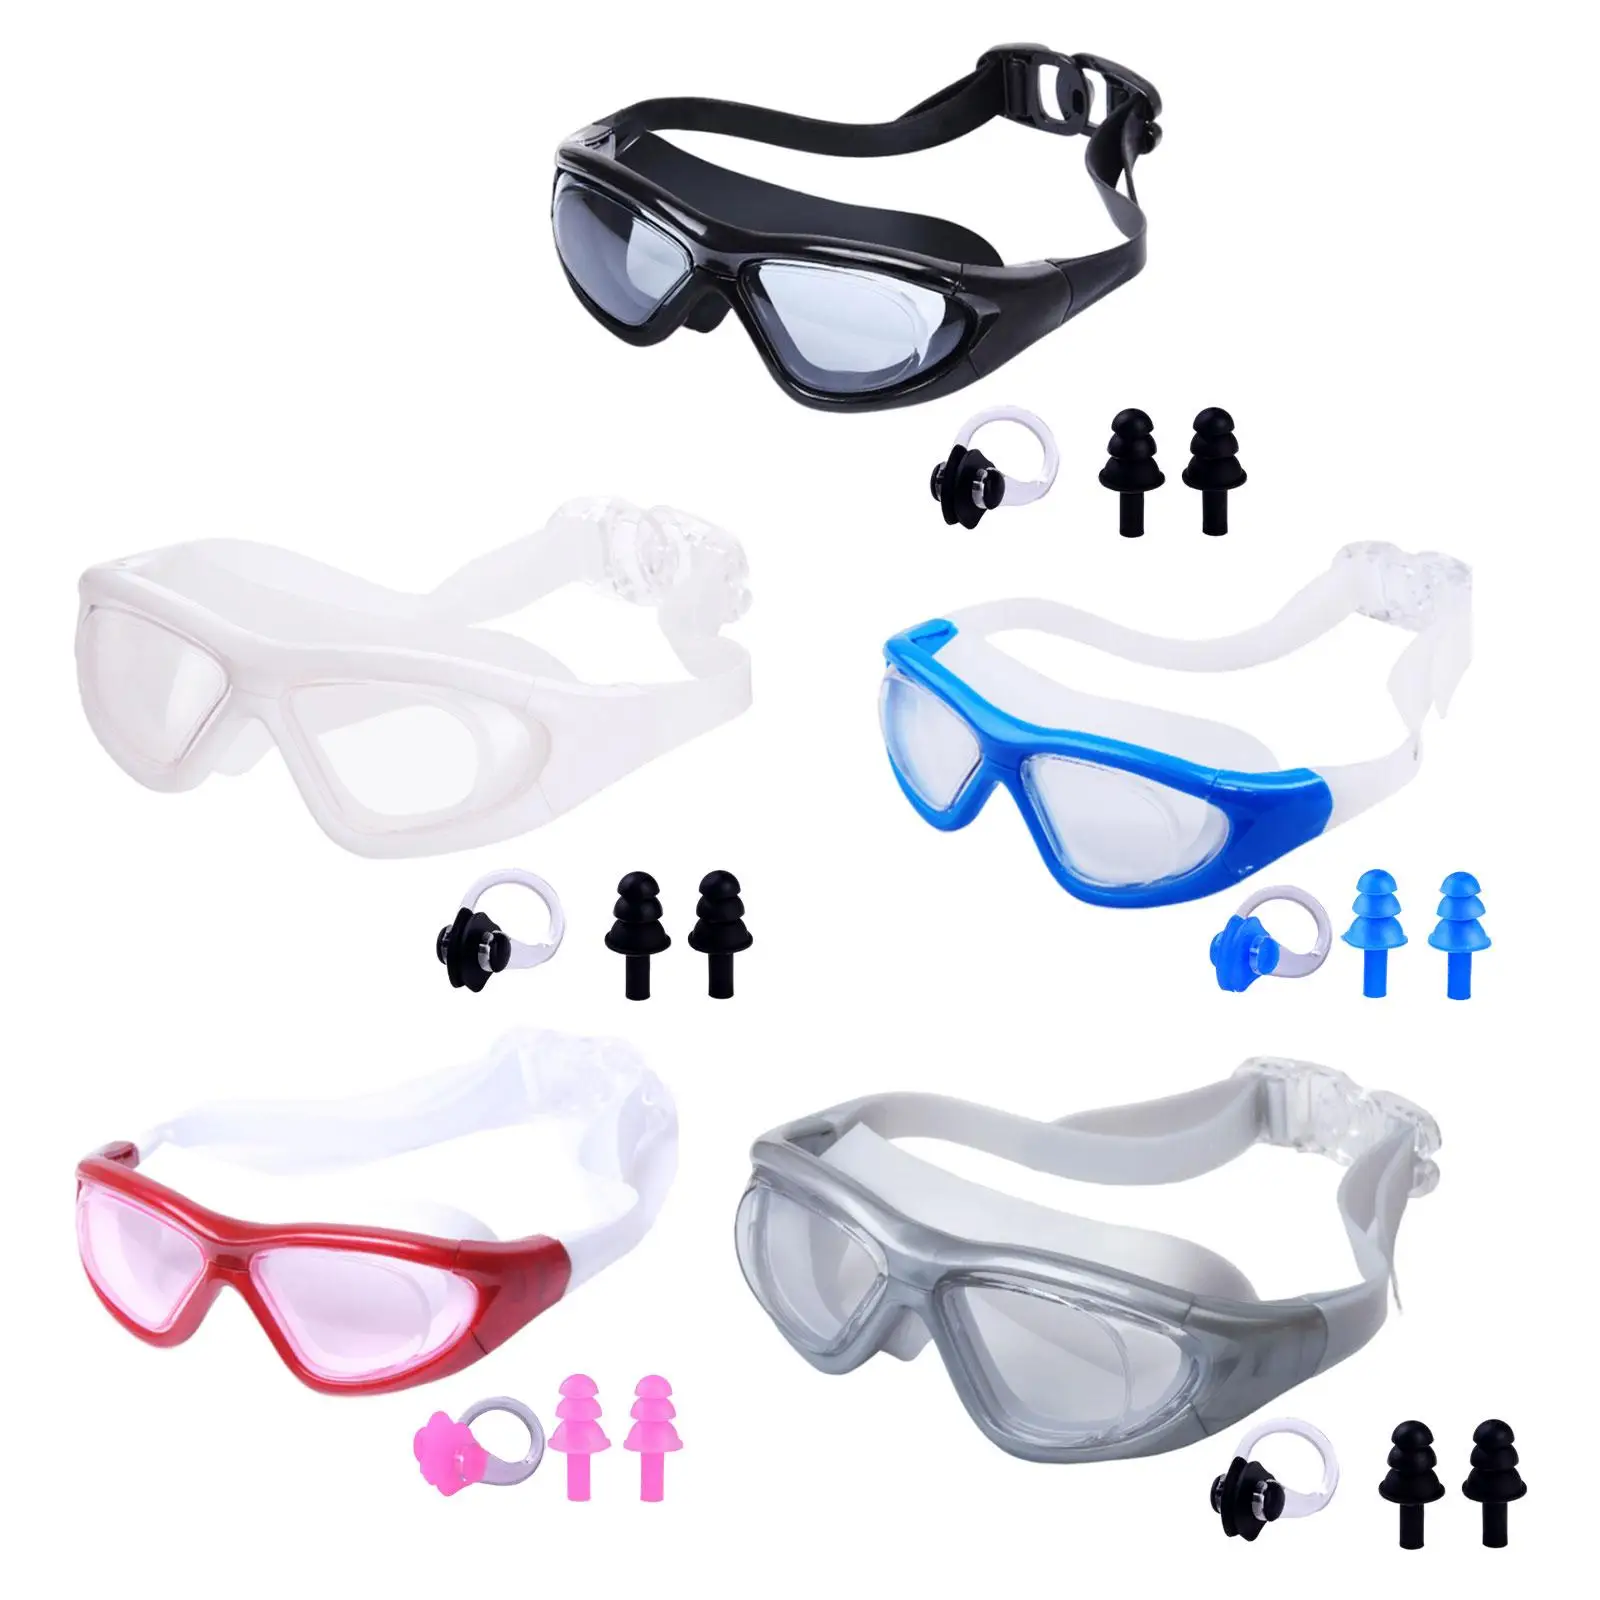 Swimming Goggles Clear Anti Fog No Leaking Professional Portable Wide View Diving Googles for Teens Women Men Unisex Adult